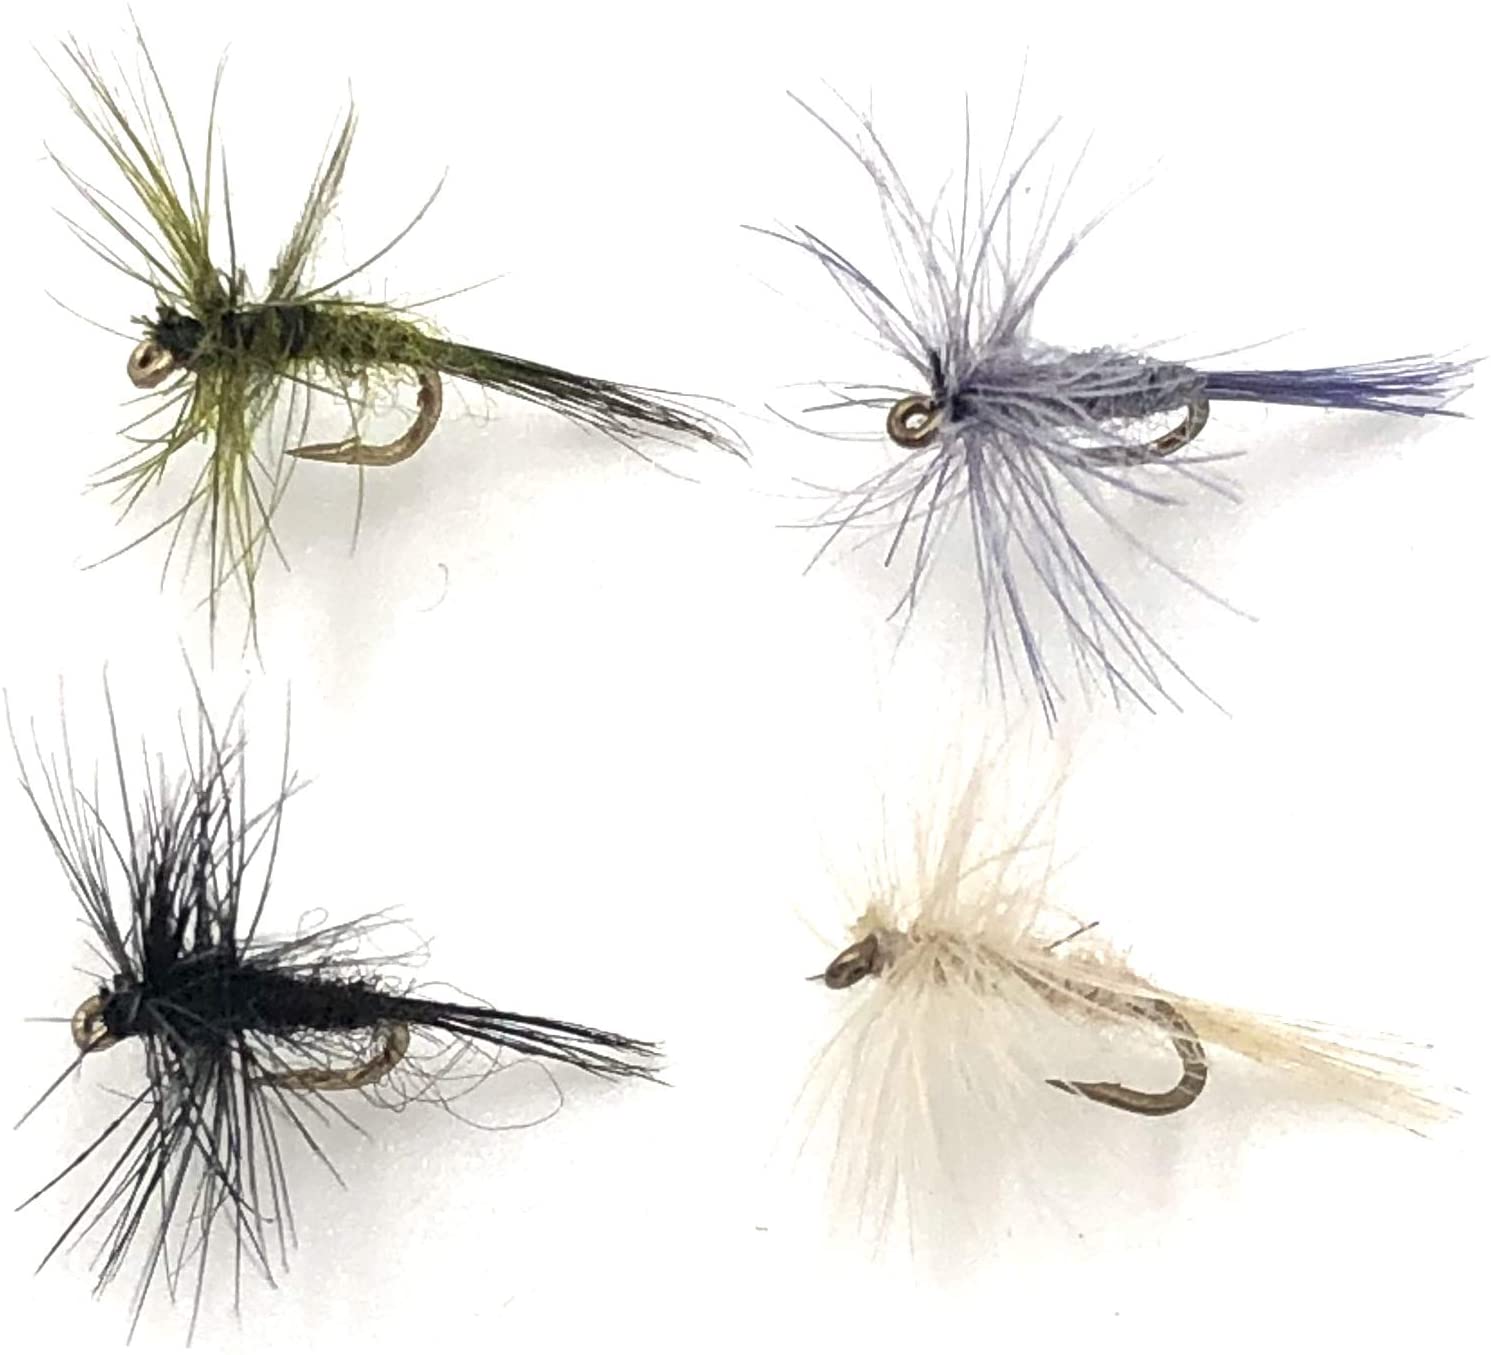 Flies for fly fishing